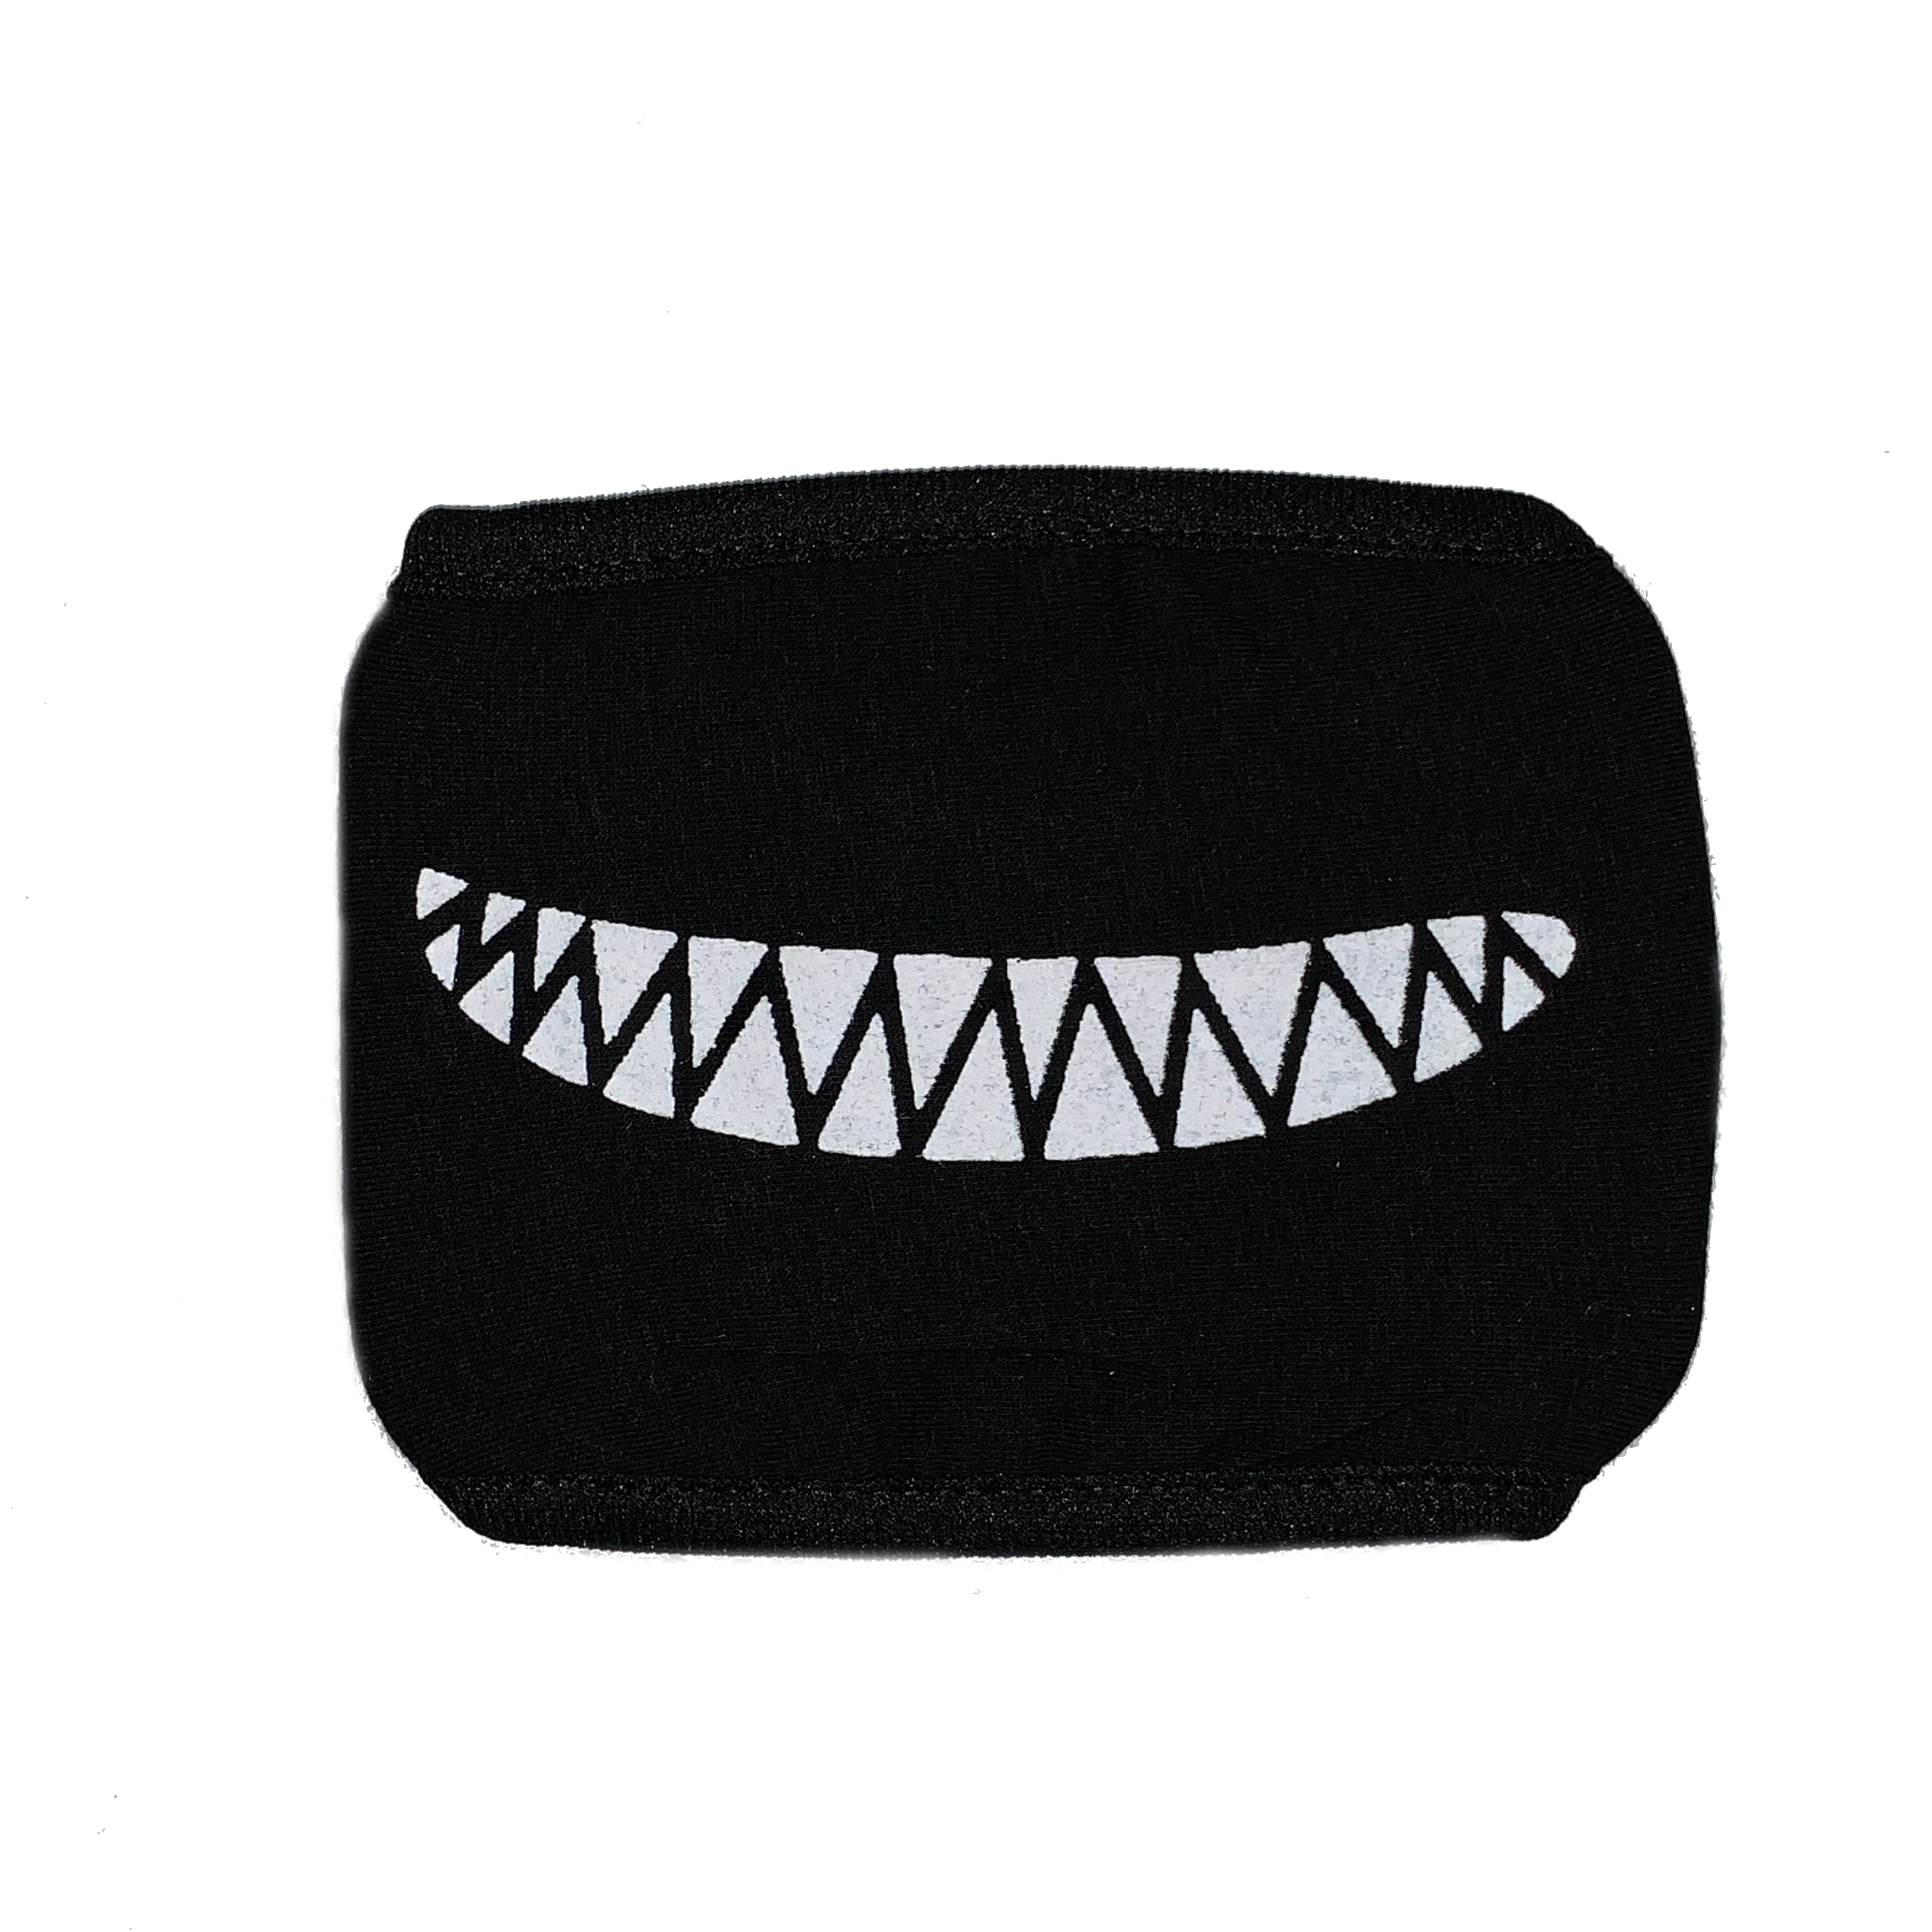 Cosplay Mask Face Mouth Mask Anime Smile Black One Size Fits Most